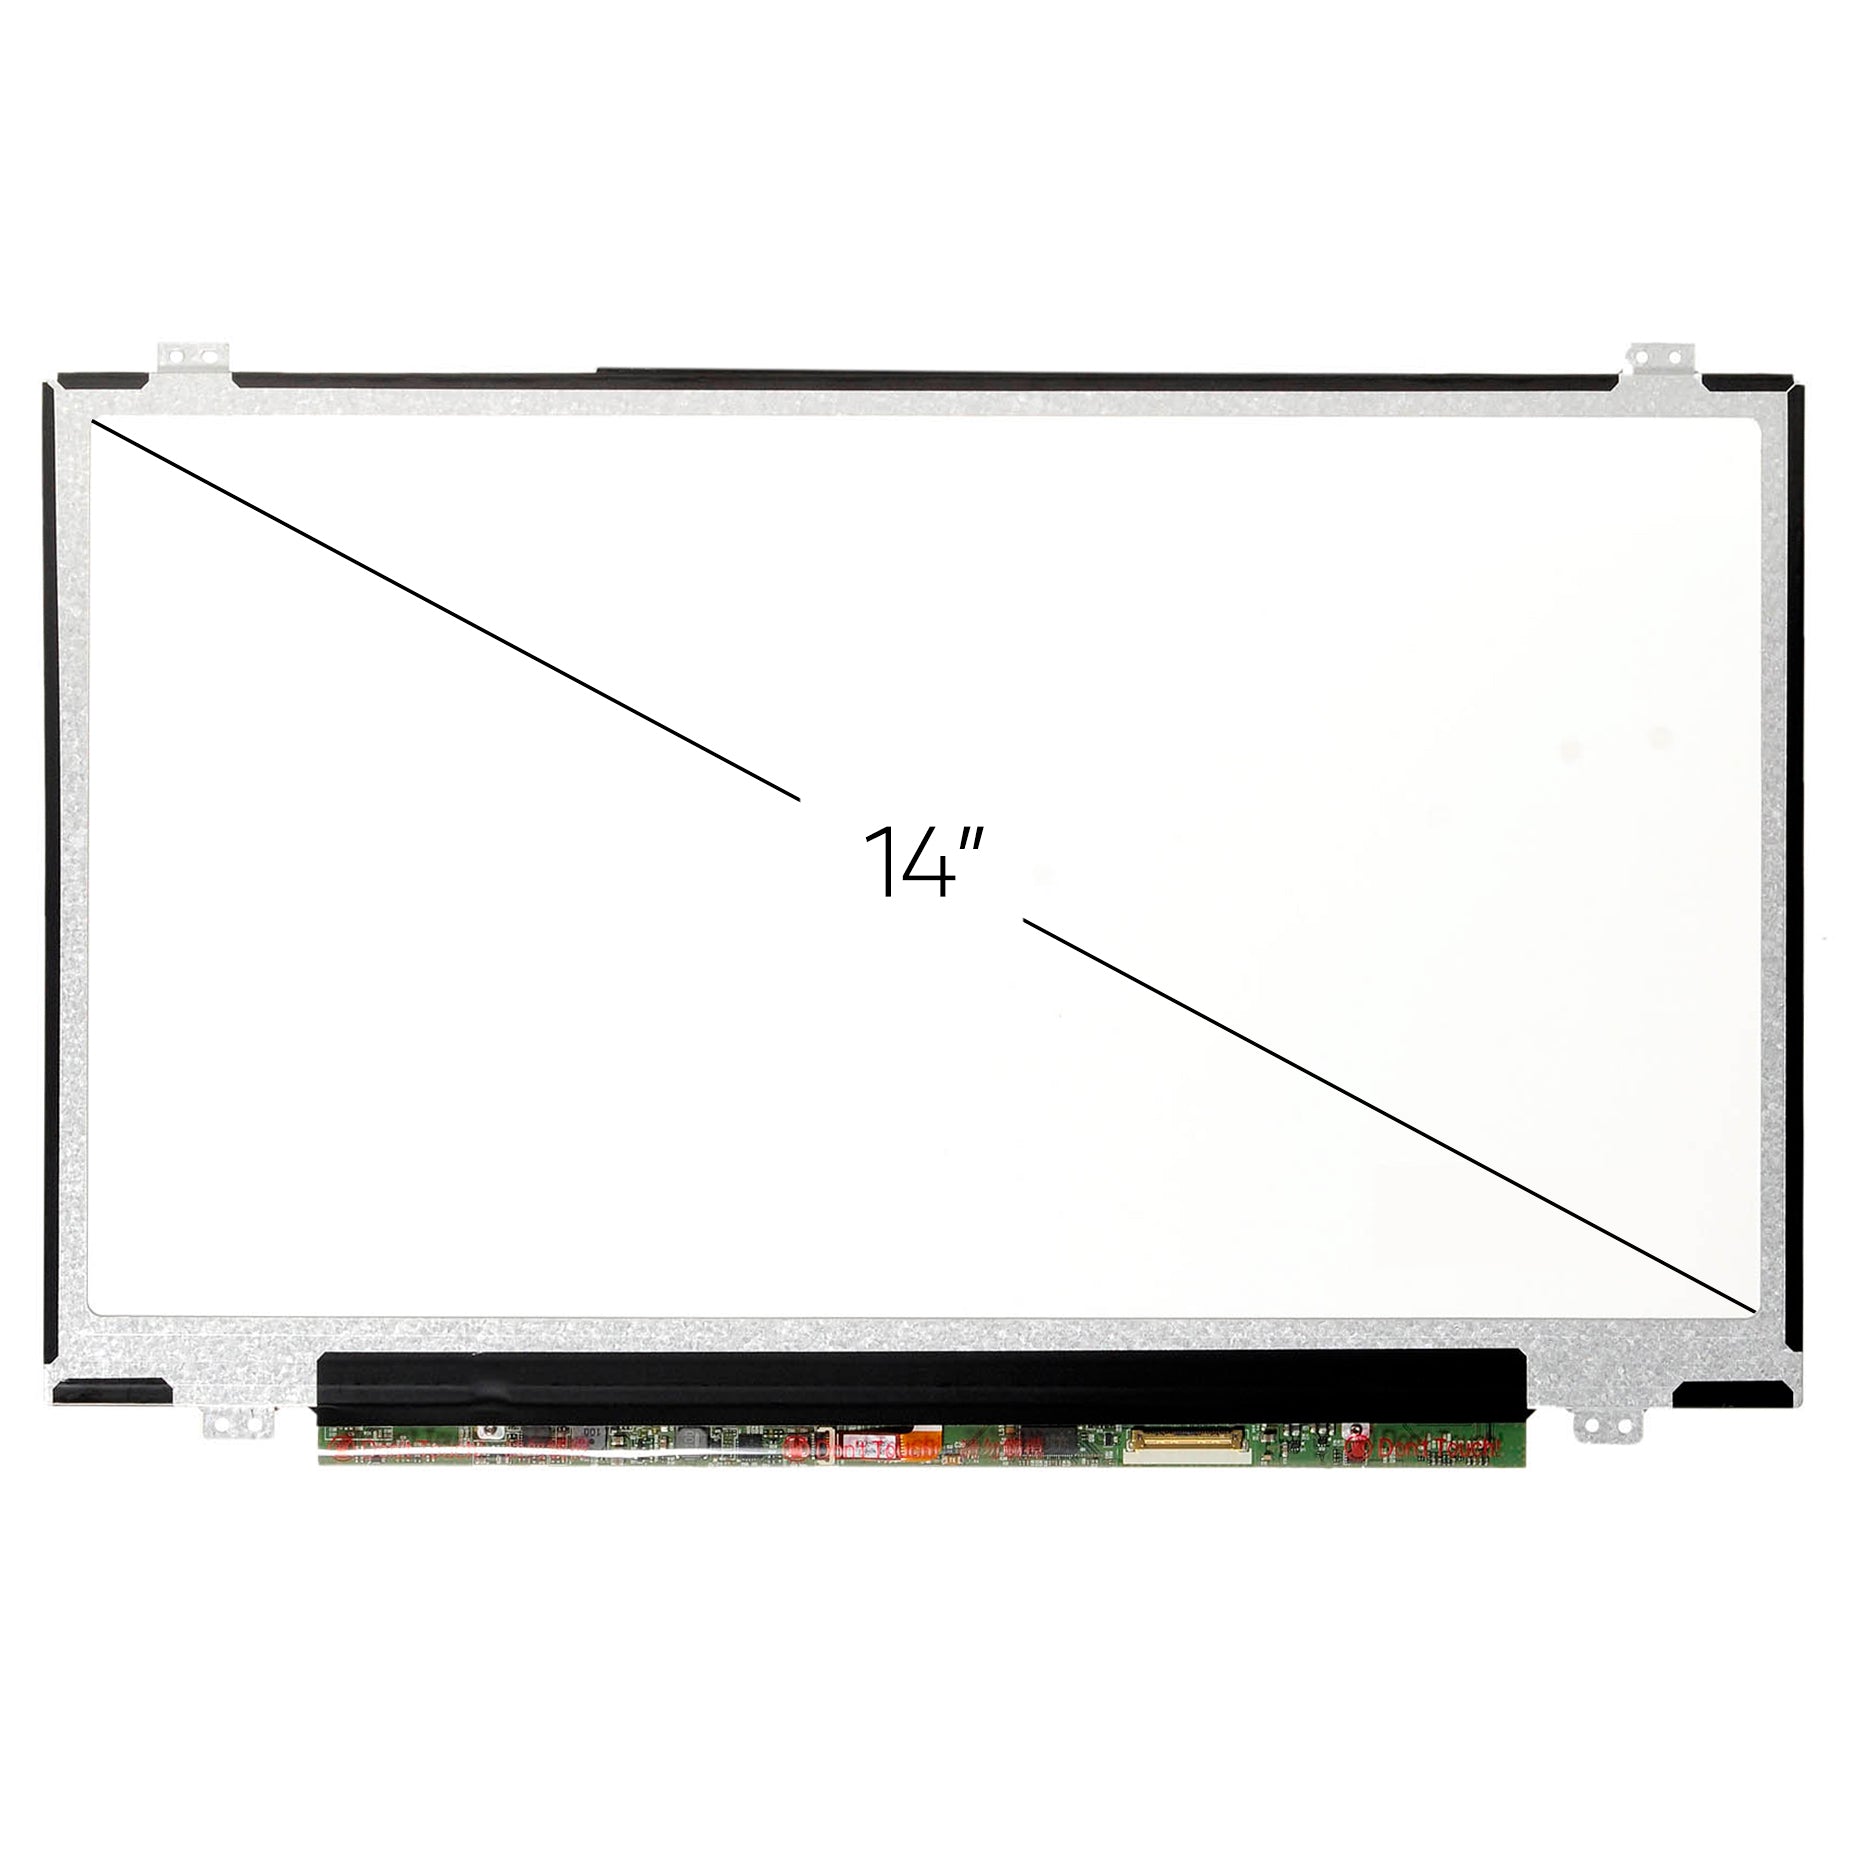 Screen Replacement for Lenovo Thinkpad T440S FHD 1920x1080 IPS Matte LCD LED Display